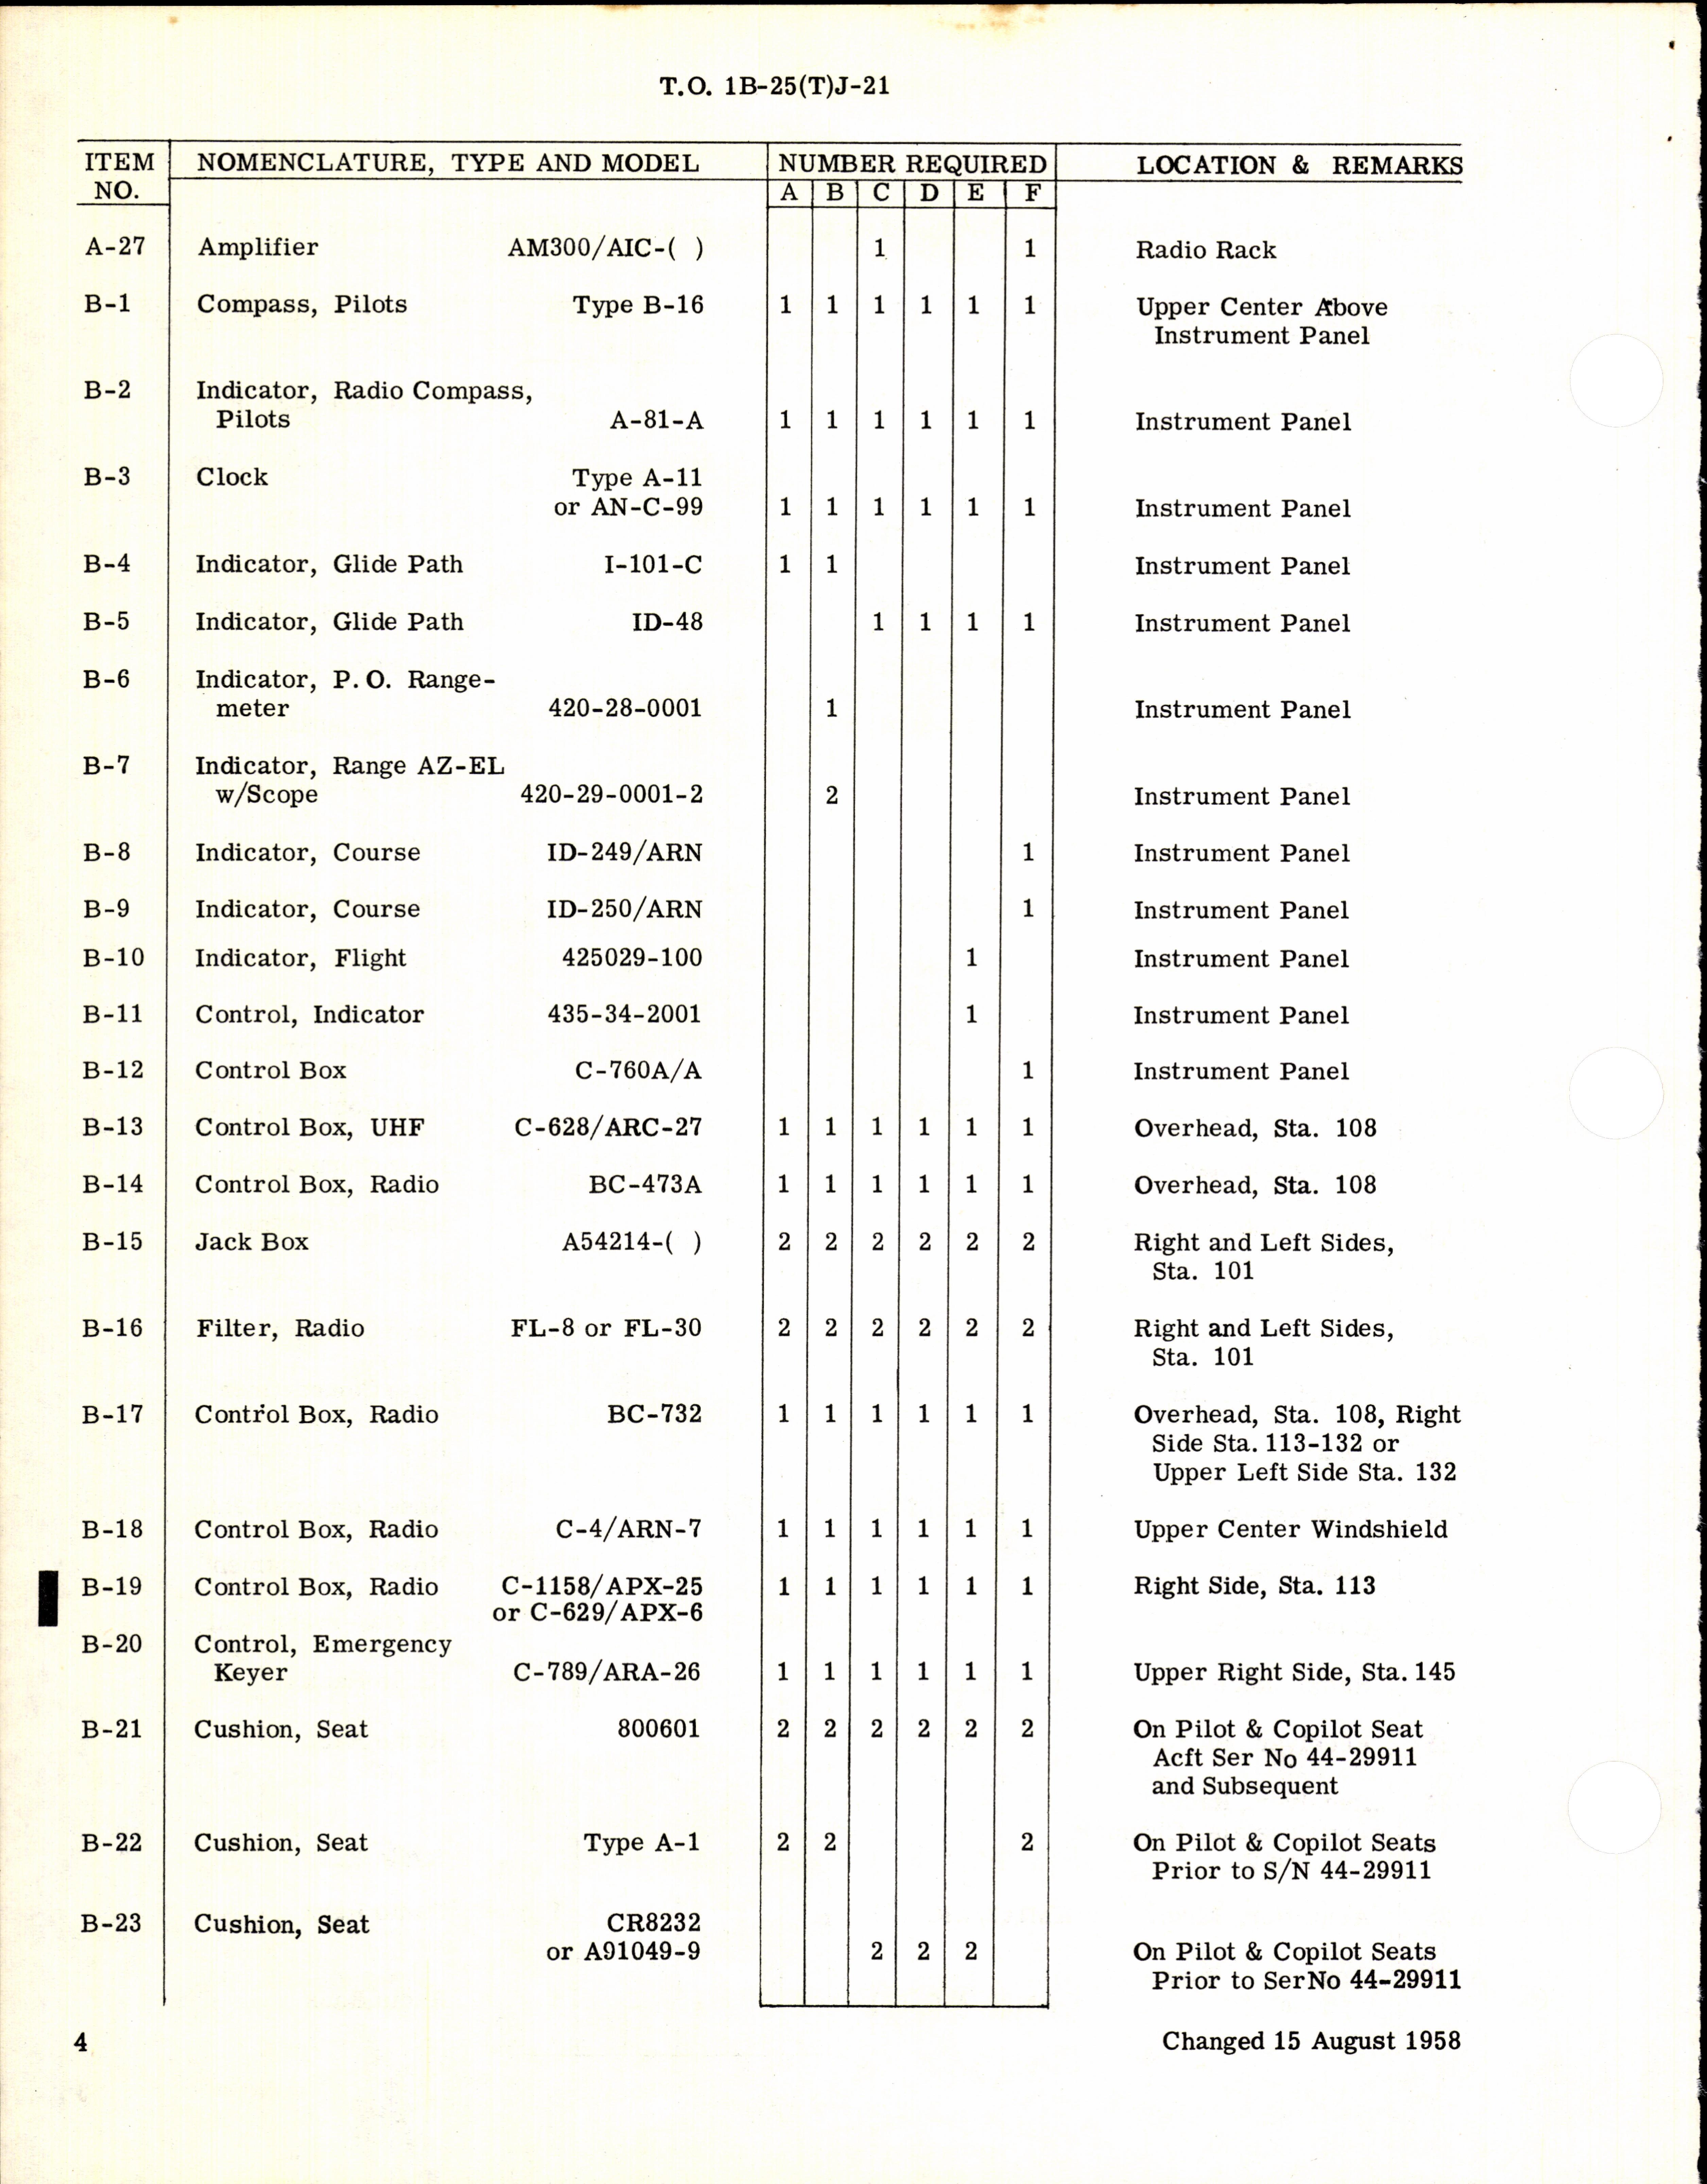 Sample page 4 from AirCorps Library document: Aircraft Inventory Record for B-25J, K, L, M, and N